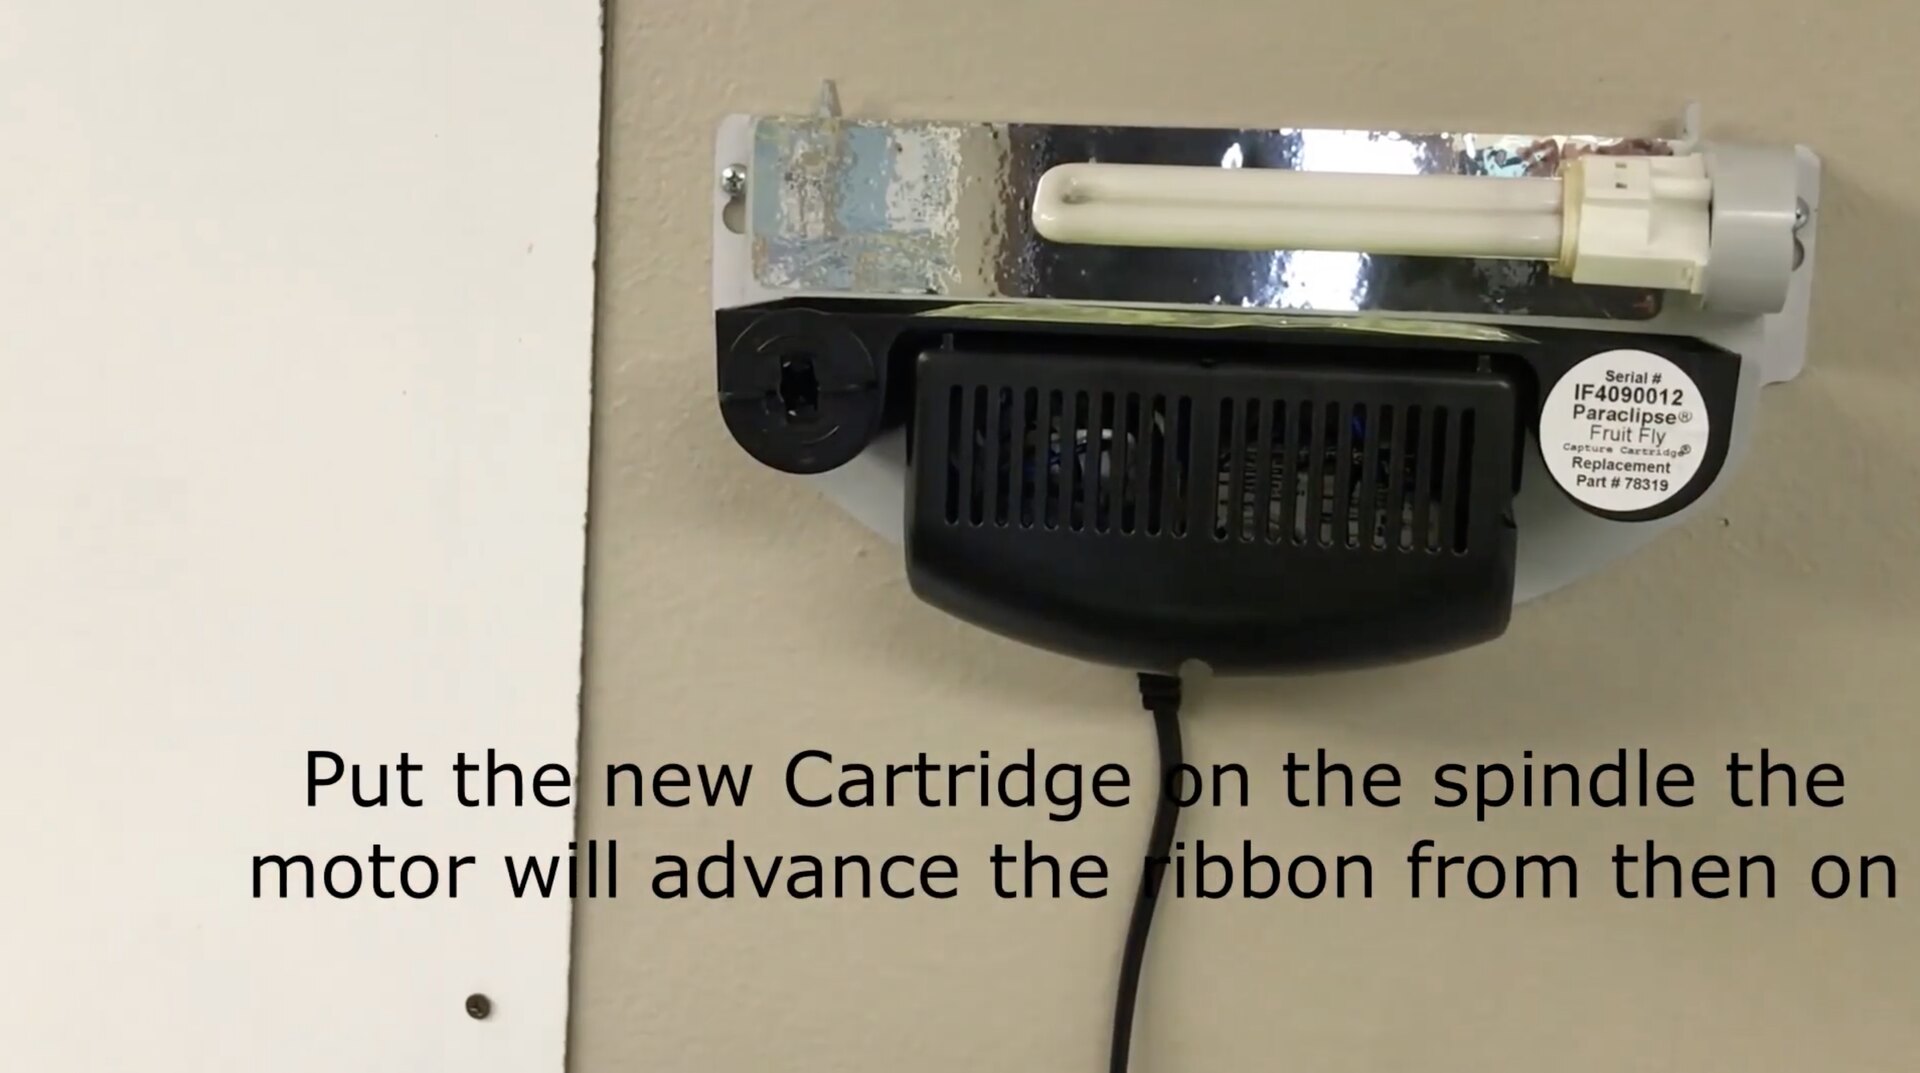 https://cdn.webstaurantstore.com/images/videos/extra_large/how_to_replace_fly_patrol_cartridge.jpg